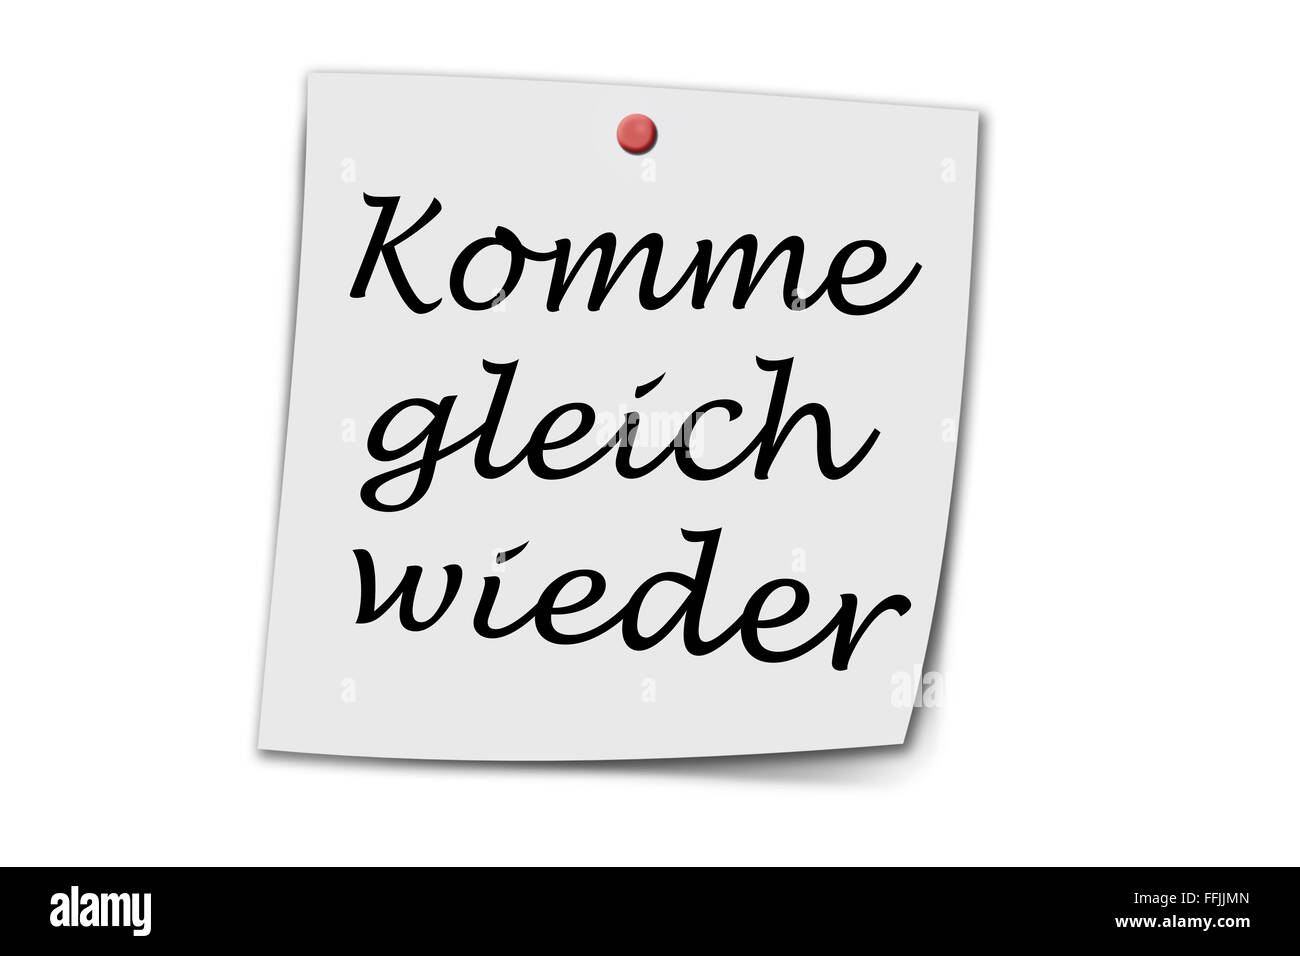 Komme gleich wieder (German Be richt back) written on a memo isolated on white Stock Photo